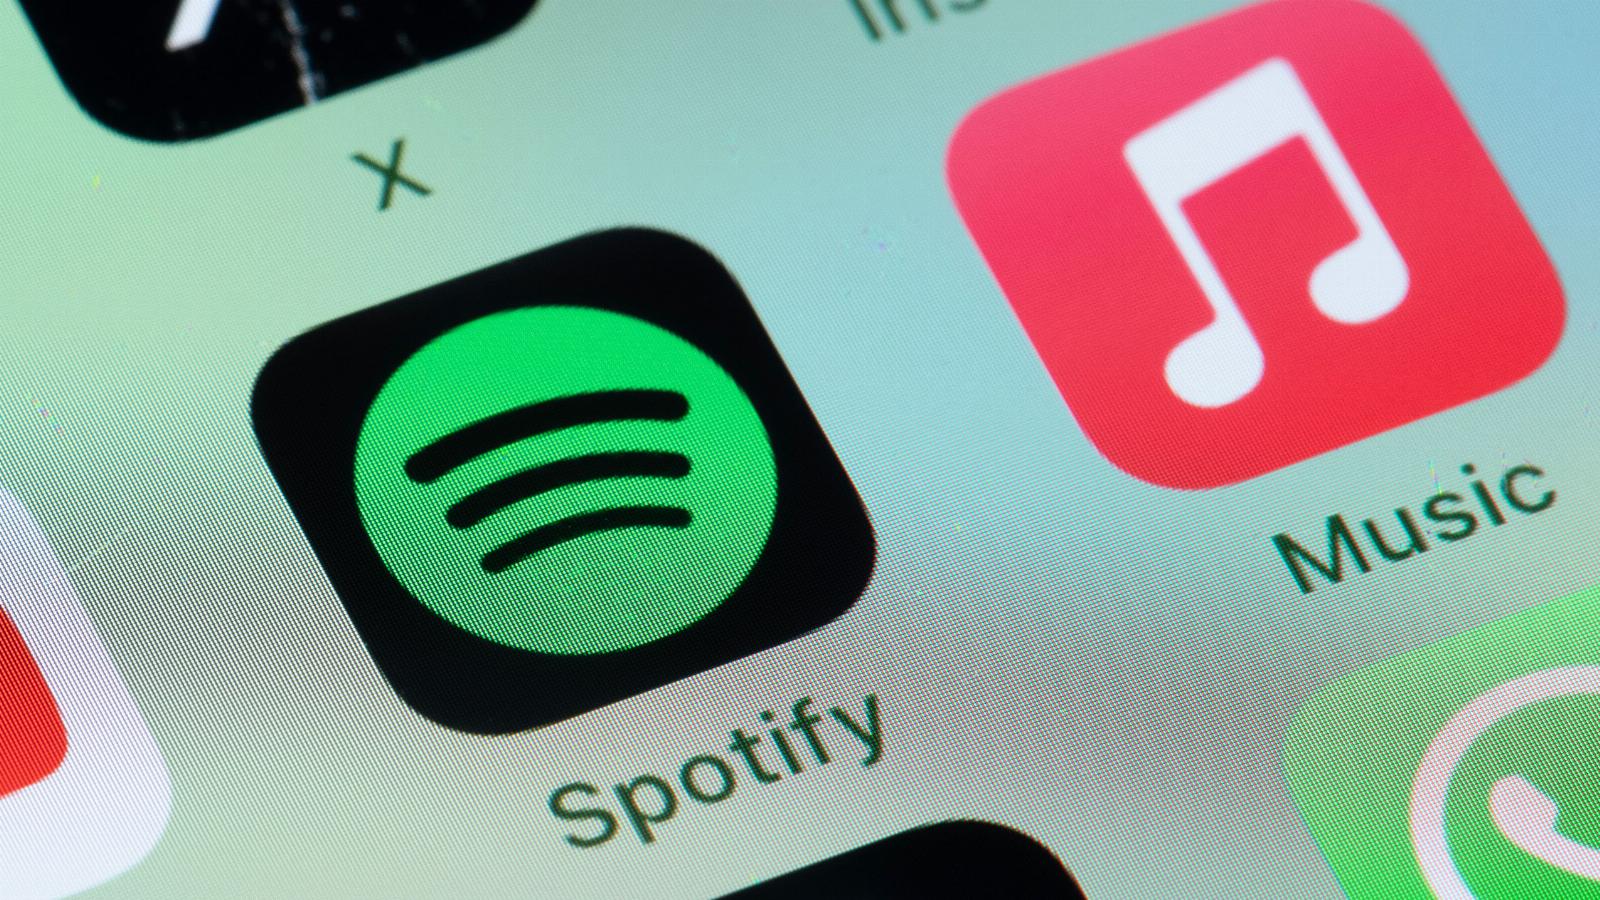 Spotify submits a new update to Apple with pricing information for EU users